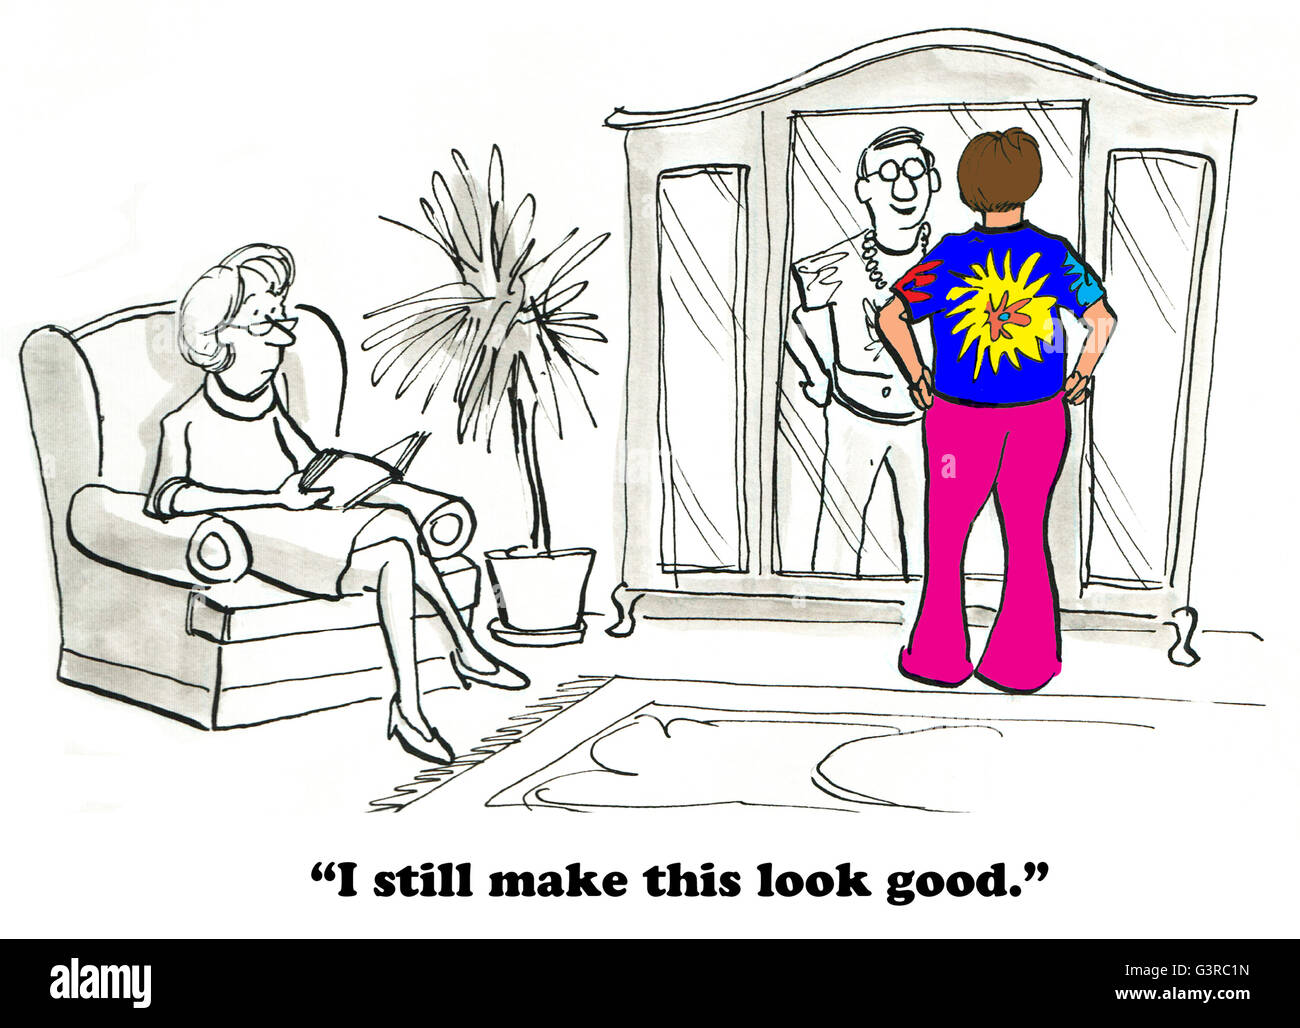 Cartoon about memories and 1960s clothes. Stock Photo